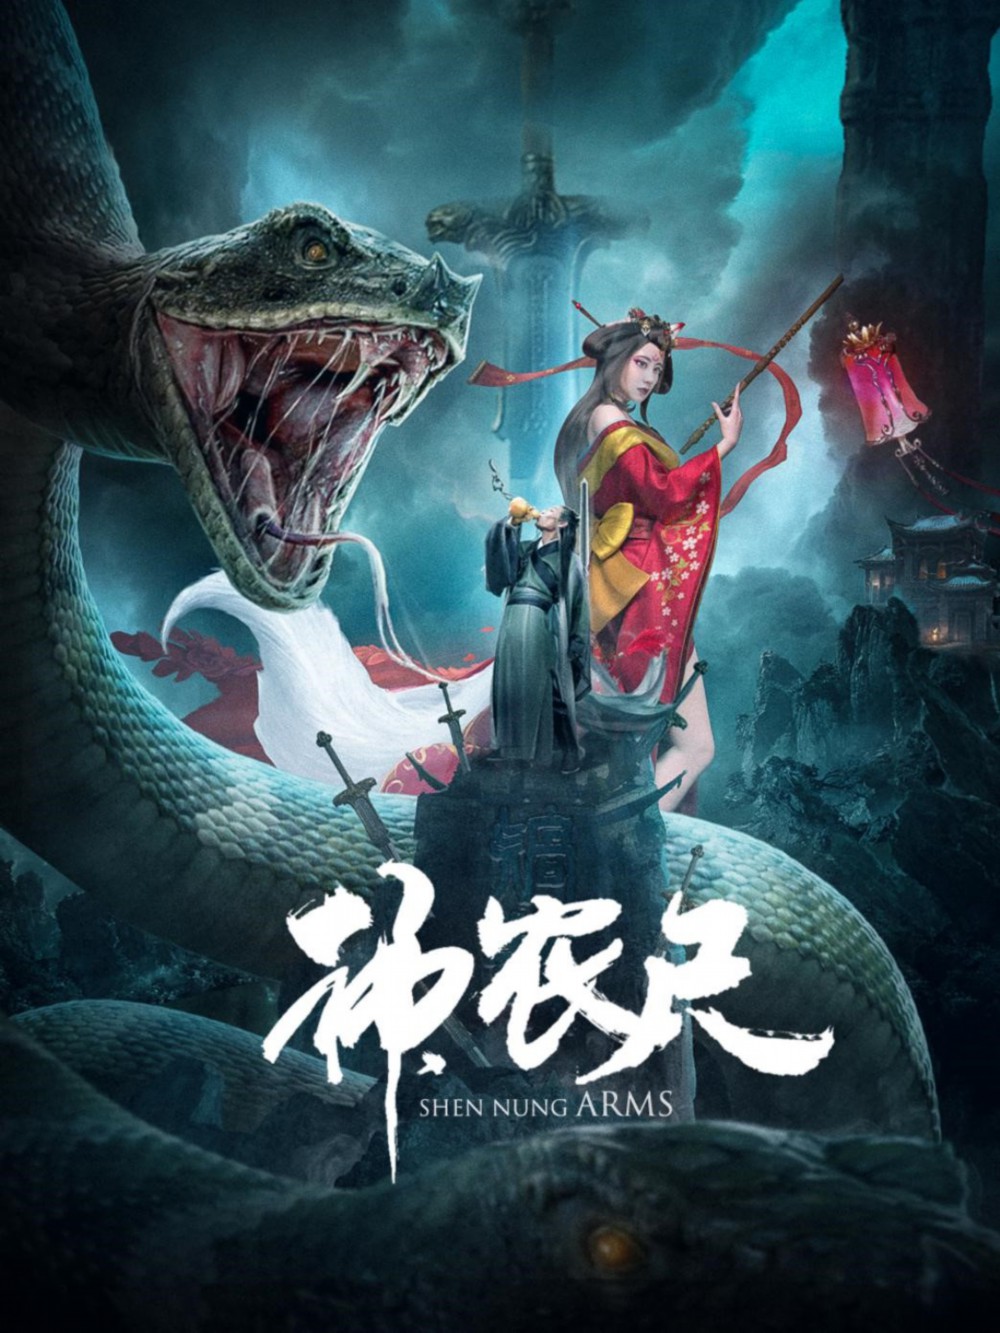 Sword of Shennong (2020) Hindi Dubbed (VoiceOver) 720p HDRip 750MB